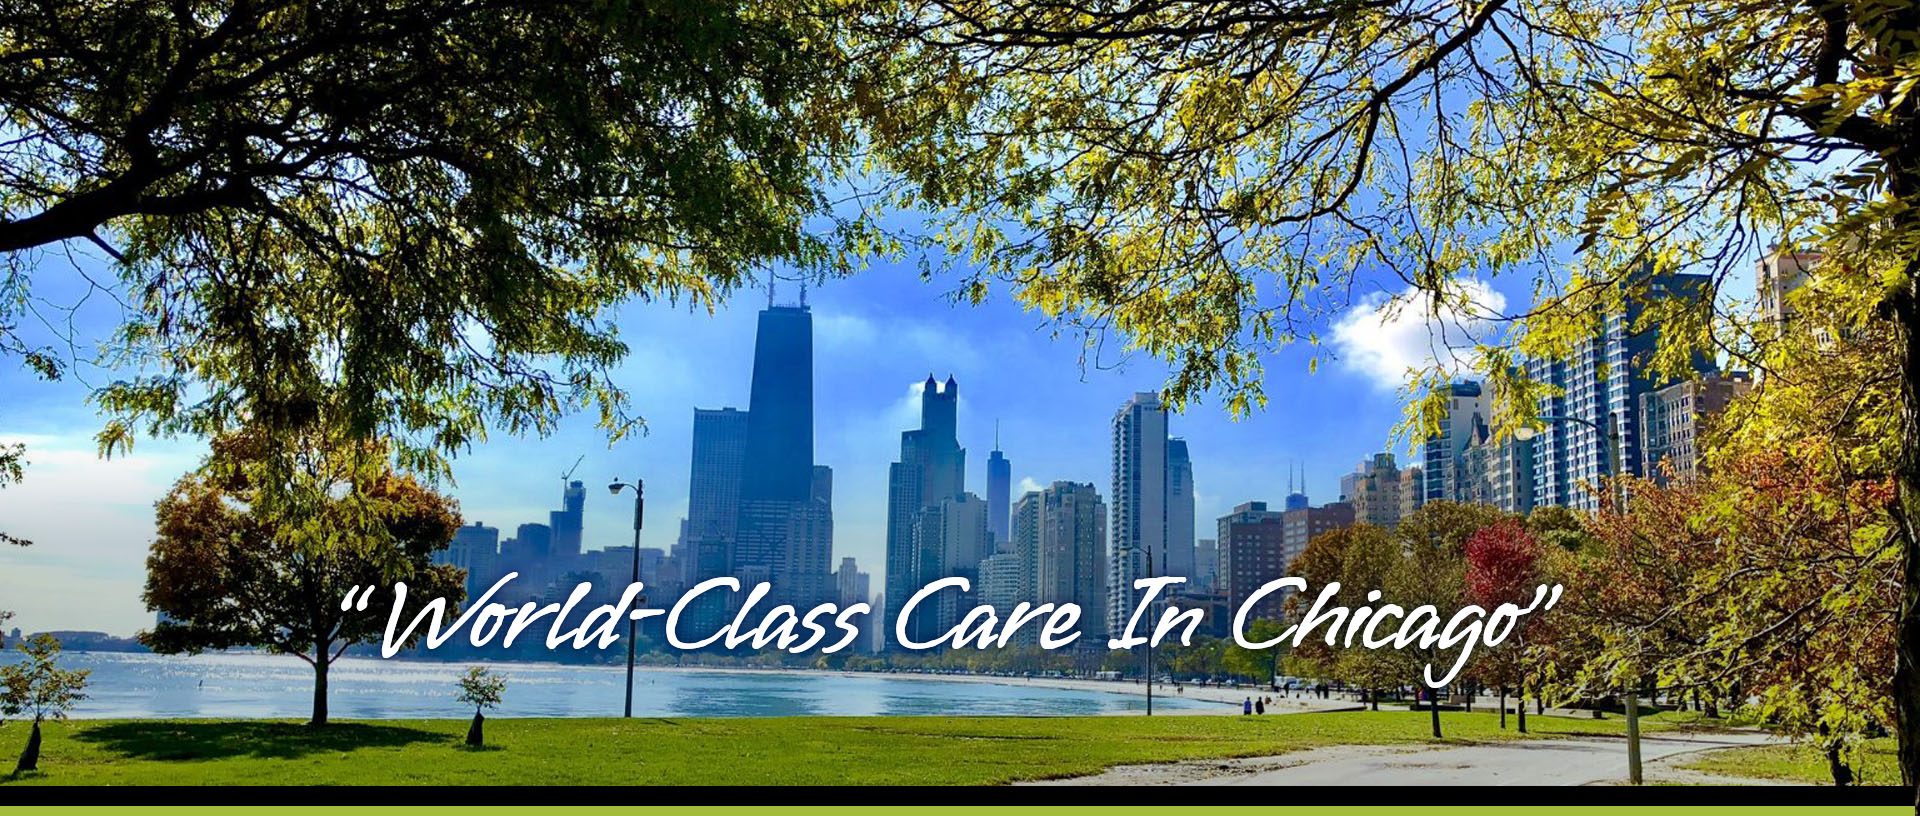 World-Class Care in Chicago